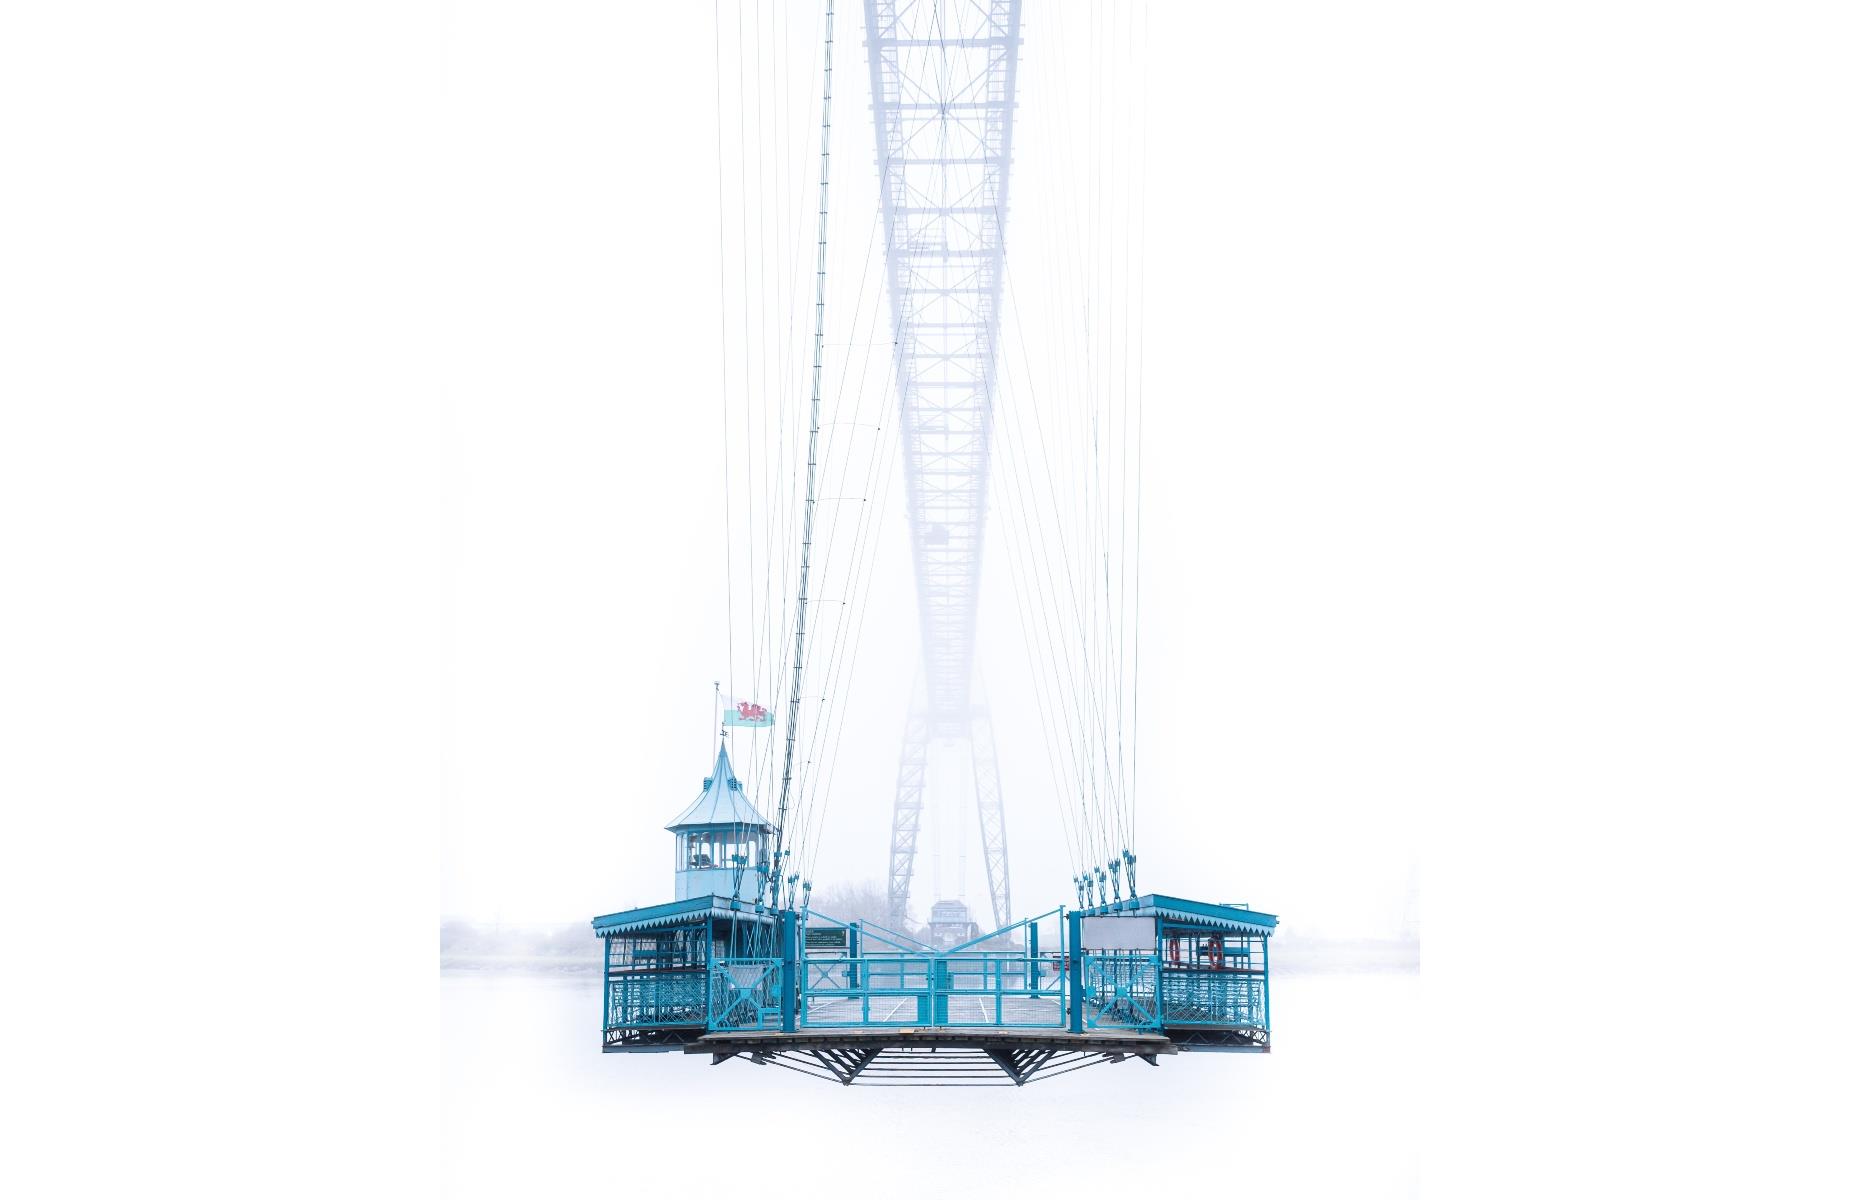 <p>Clearly a magnet for photographers, Newport Transporter Bridge featured twice in this year's awards, in two strikingly different images. We're captivated by the contrast between the vivid structure and the misty backdrop in this shot, taken by local photographer Cormac Downes, who said: "I was lucky one morning to capture it emerging from the fog."</p>  <p><strong><a href="https://www.loveexploring.com/galleries/143952/the-worlds-recordbreaking-bridges?page=1">The world's record-breaking bridges</a></strong></p>